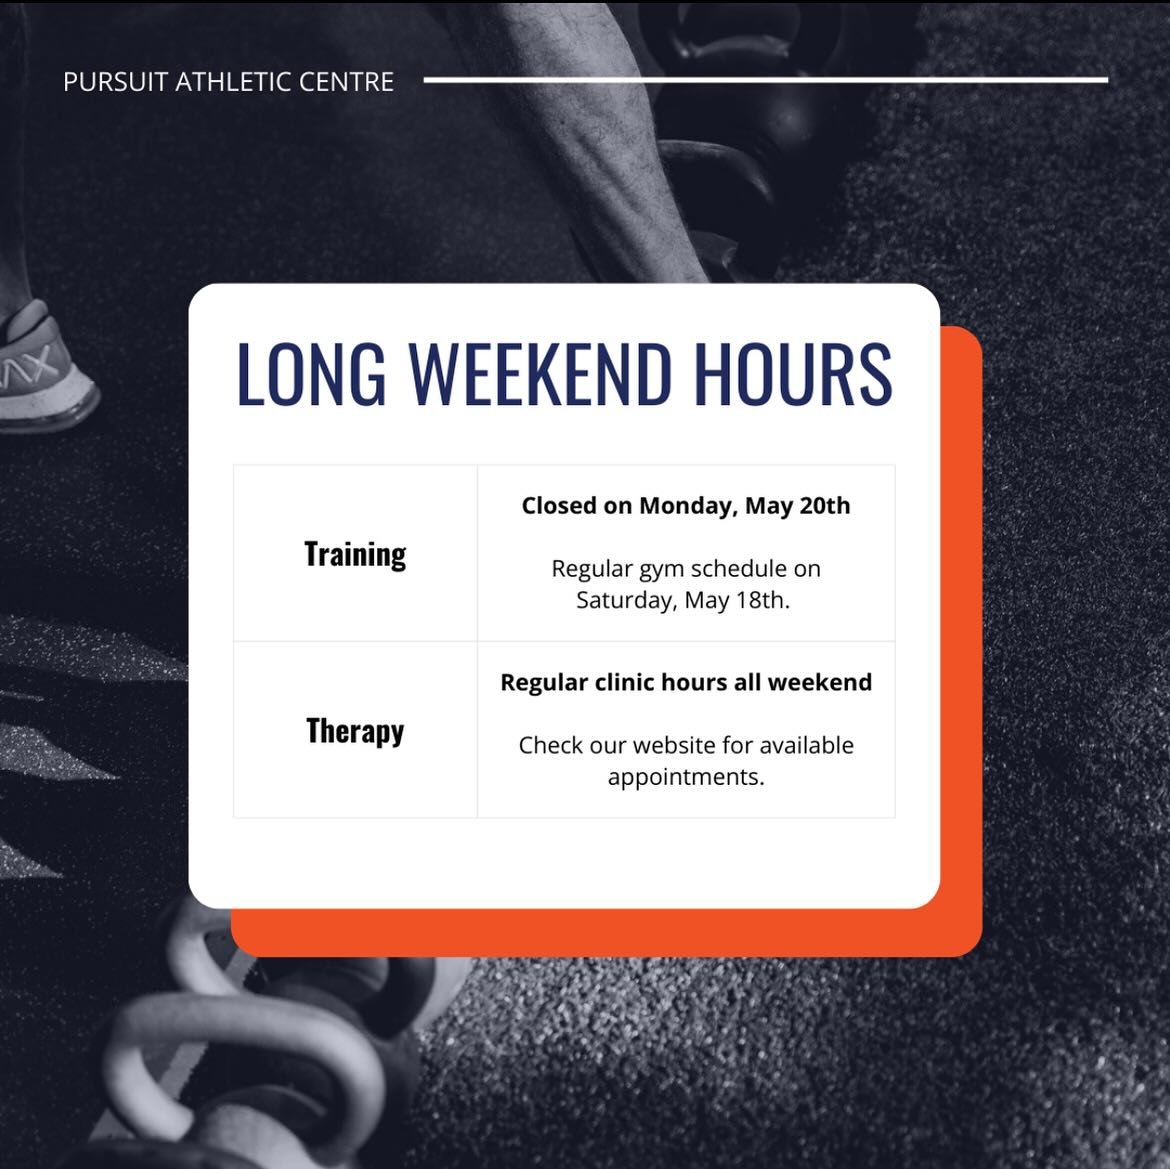 Long Weekend Hours ☀️ 

🟠 Our therapy and gym hours have been posted for this May long weekend.

🔵 We wish everyone a healthy and safe weekend however you decide to spend it!